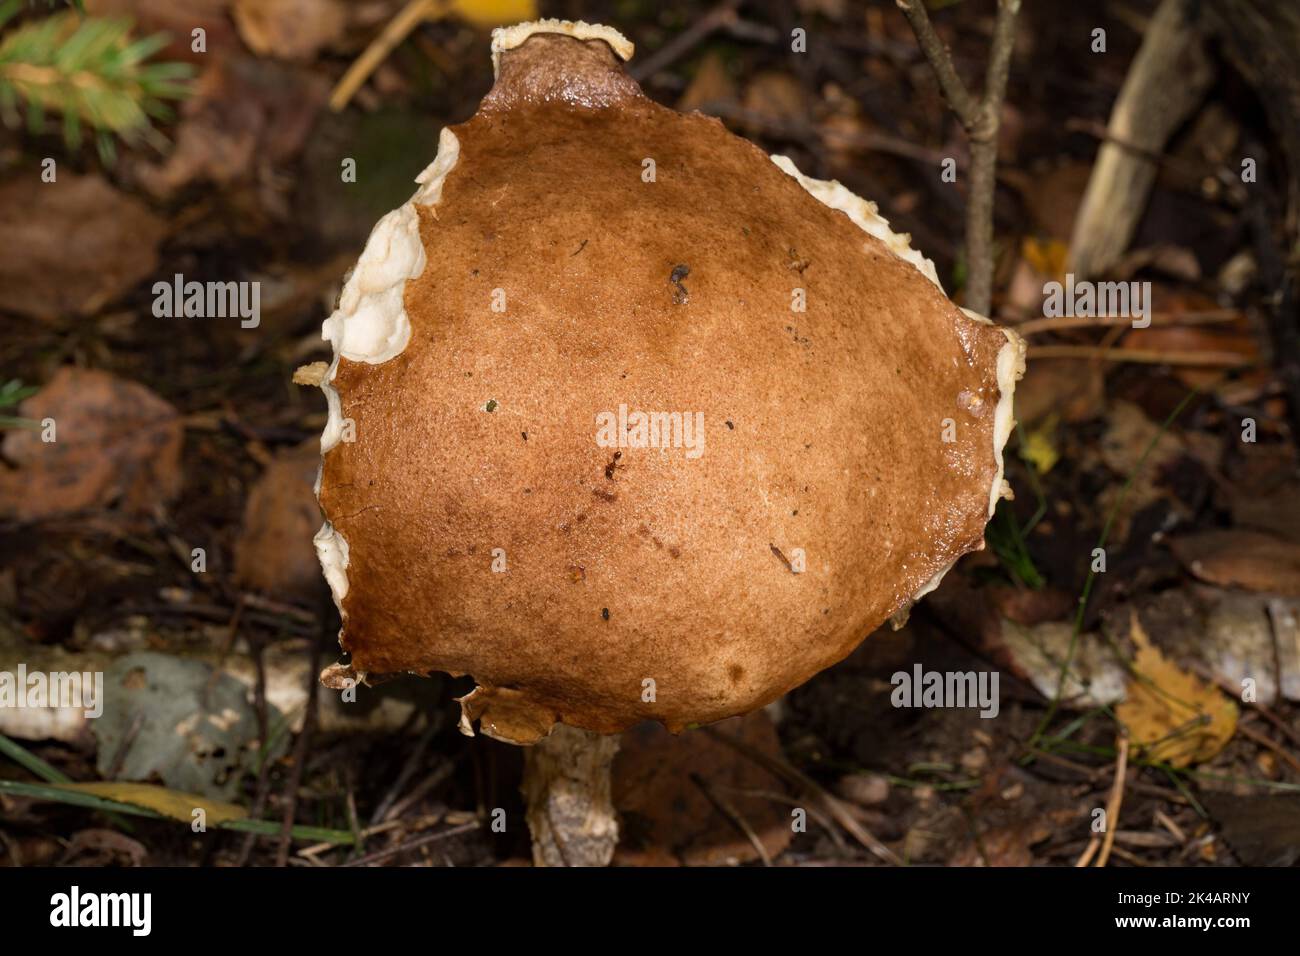 Birch mushroom fruiting body with dirty white stalk and brown cap Stock Photo